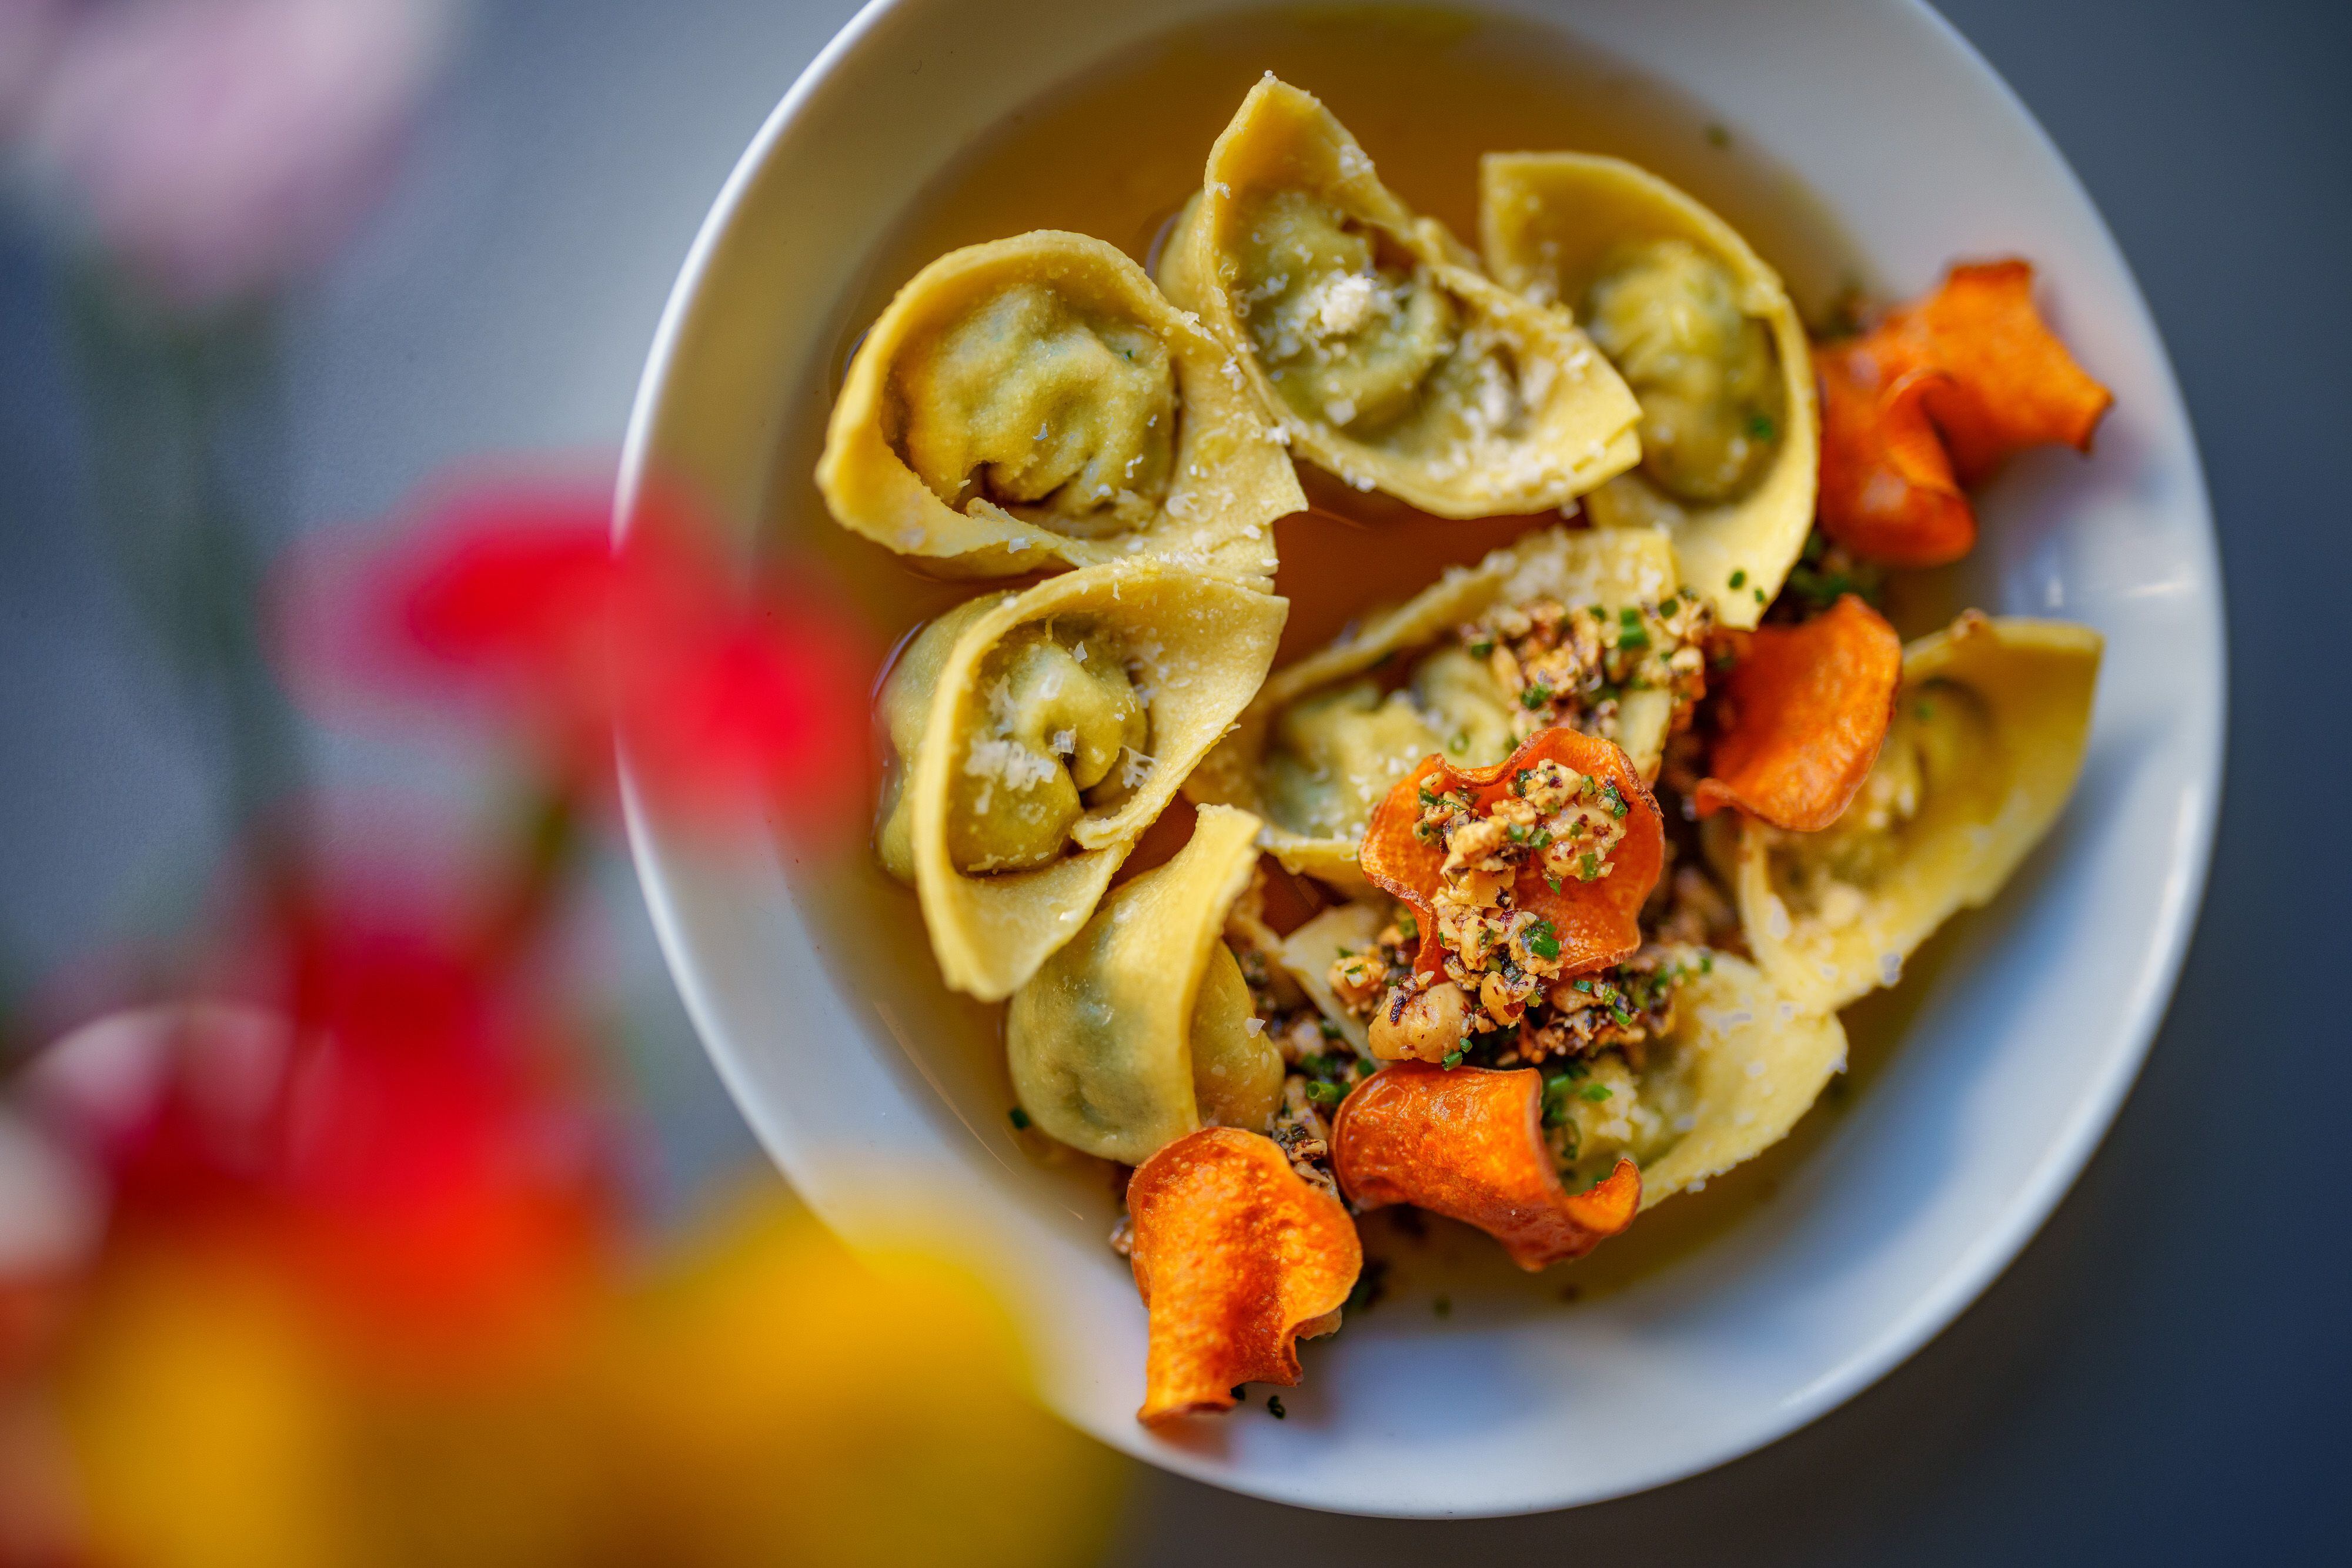 (Trent Nelson  |  The Salt Lake Tribune) Chicken tortellini at the Salt Lake City restaurant Arlo on Wednesday, April 3, 2024. The flour came from Central Milling, the eggs and chicken came from a local producer, the ricotta came from Rosehill Dairy, the herbs came from the restaurant's garden, and the mushrooms came from Intermountain Gourmet.